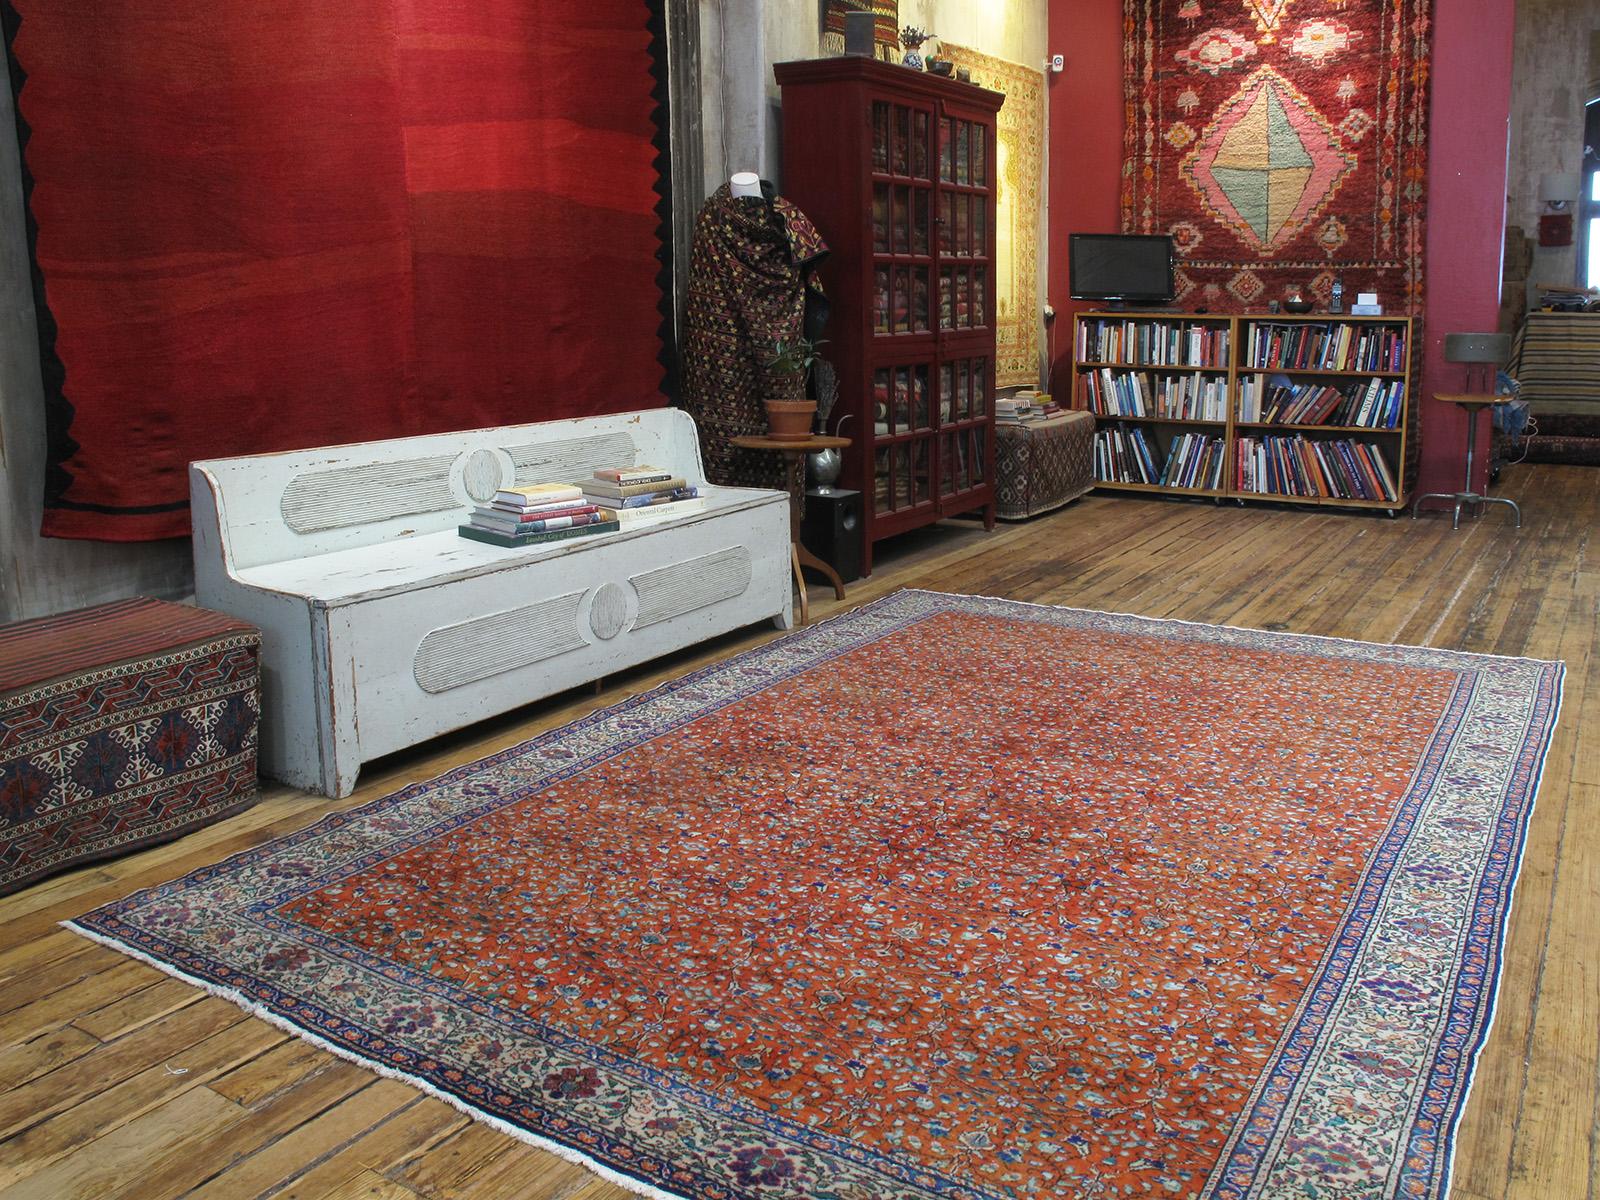 A classical beauty - an old carpet from Central Turkey with a small pattern floral design, rendered on a very pleasing burnt orange background.

Carpets like these were woven for the local Turkish market rather than export, often to much higher